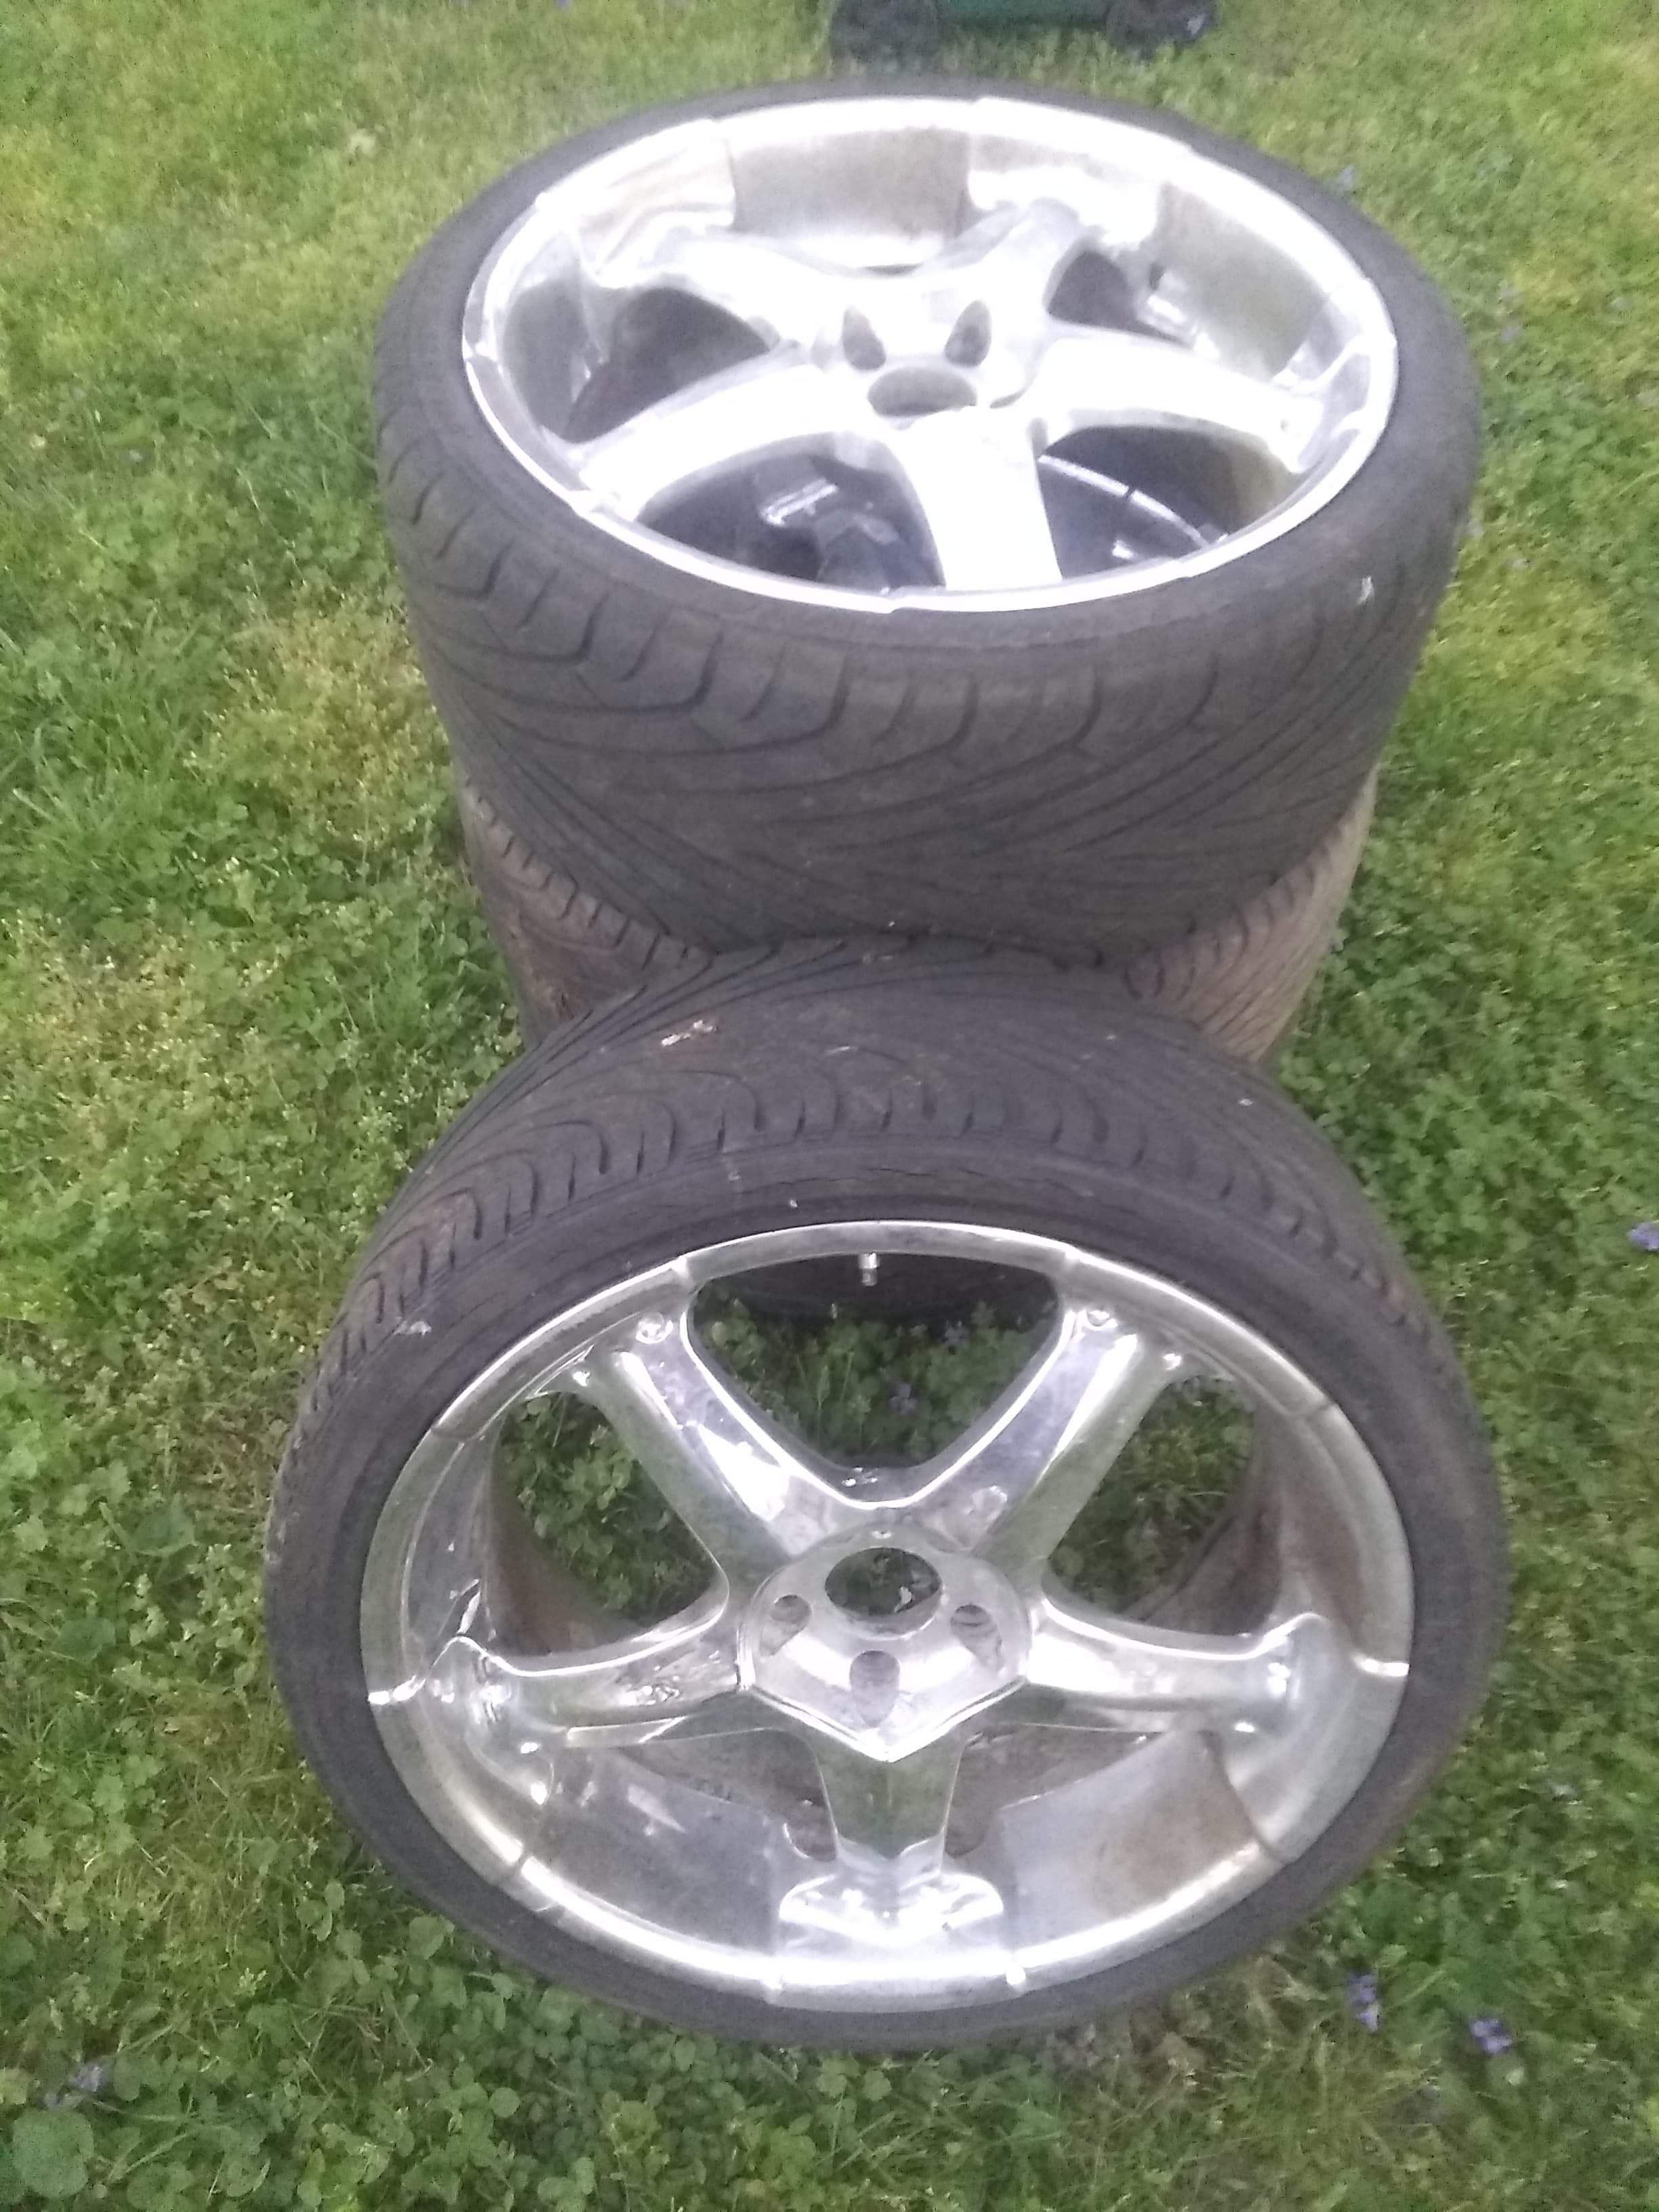 Tires and rims